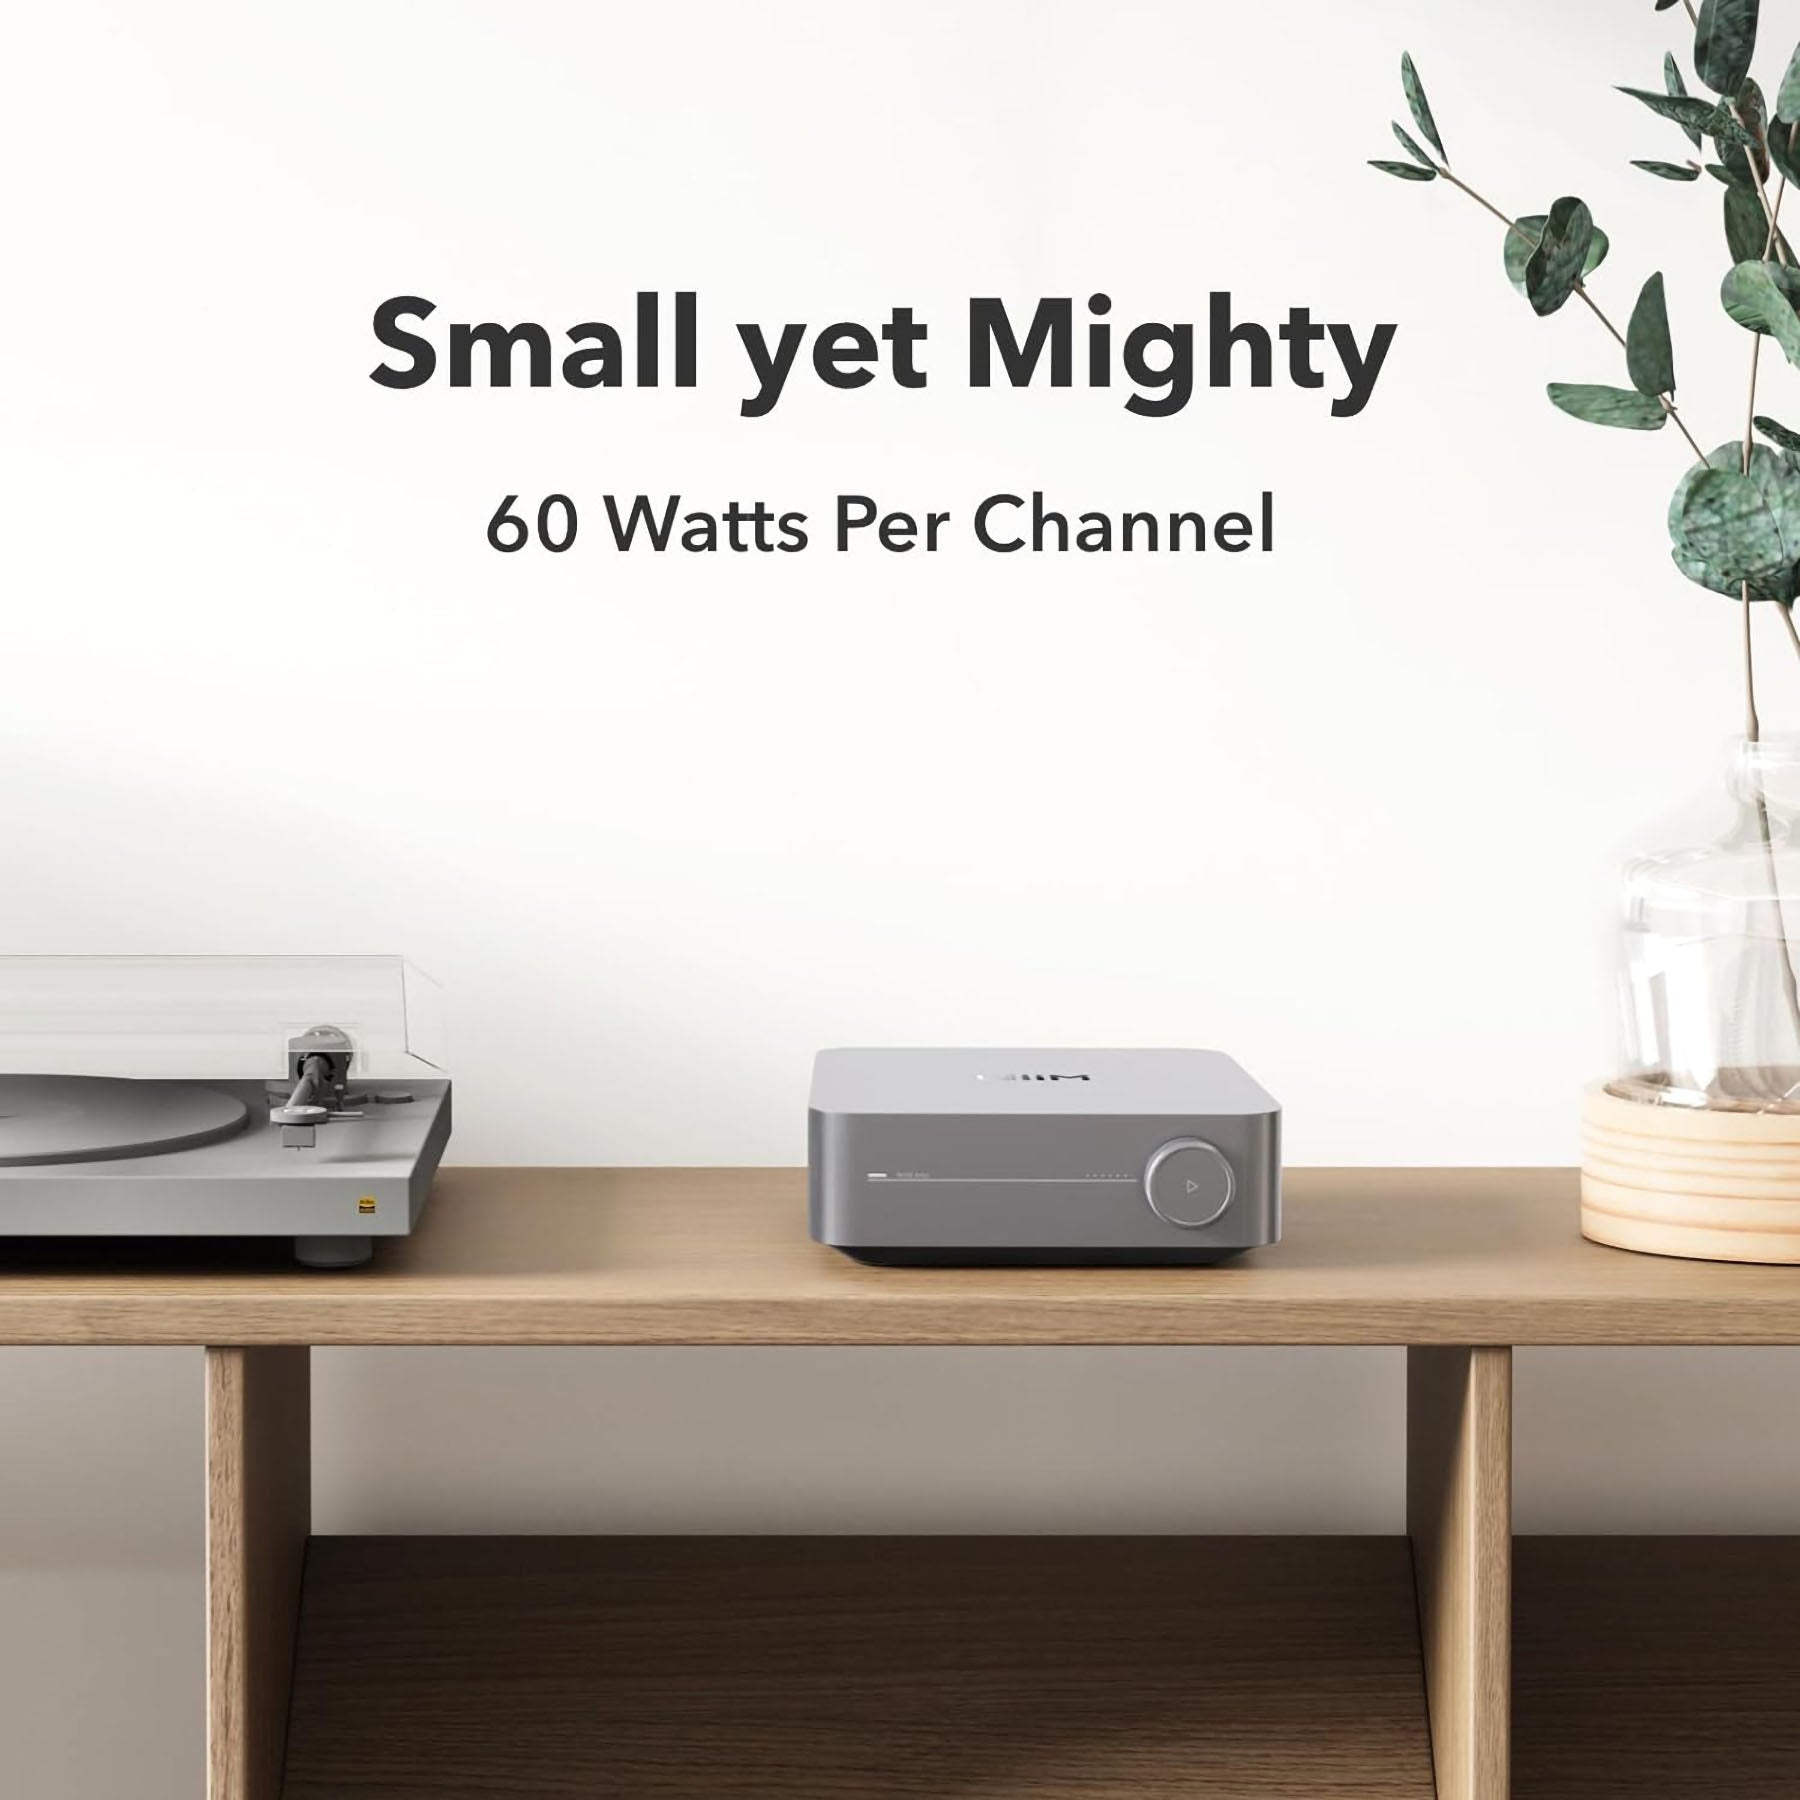 WiiM Amp: Multiroom Stereo Streaming Amplifier with AirPlay 2, Chromecast, HDMI & Voice Control